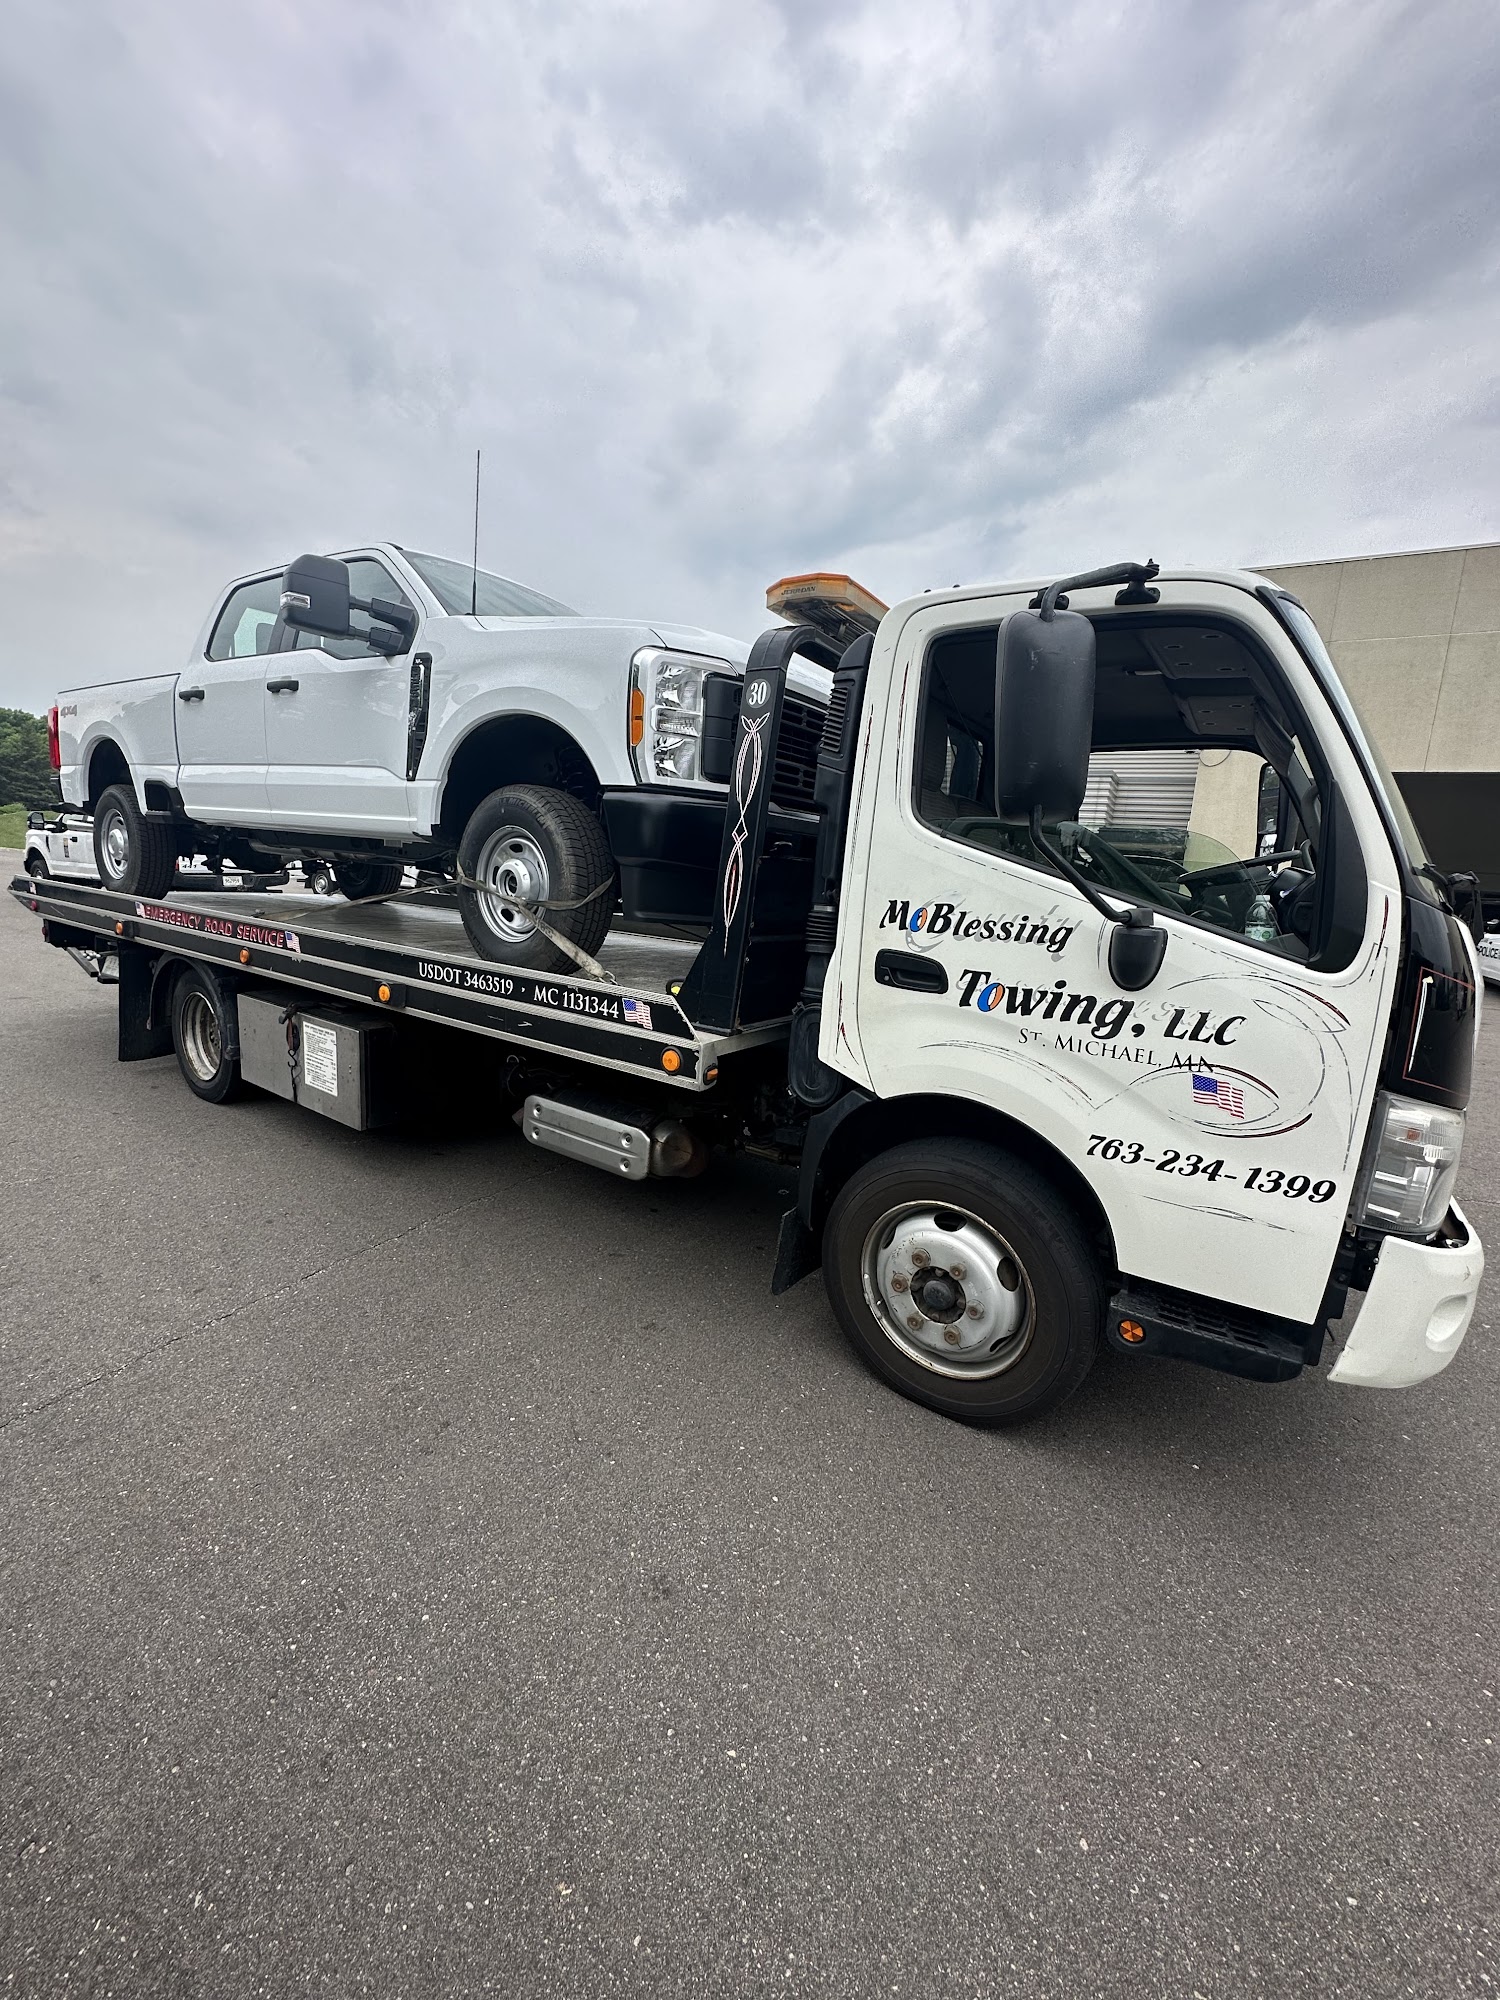 Mo Blessing Towing, LLC